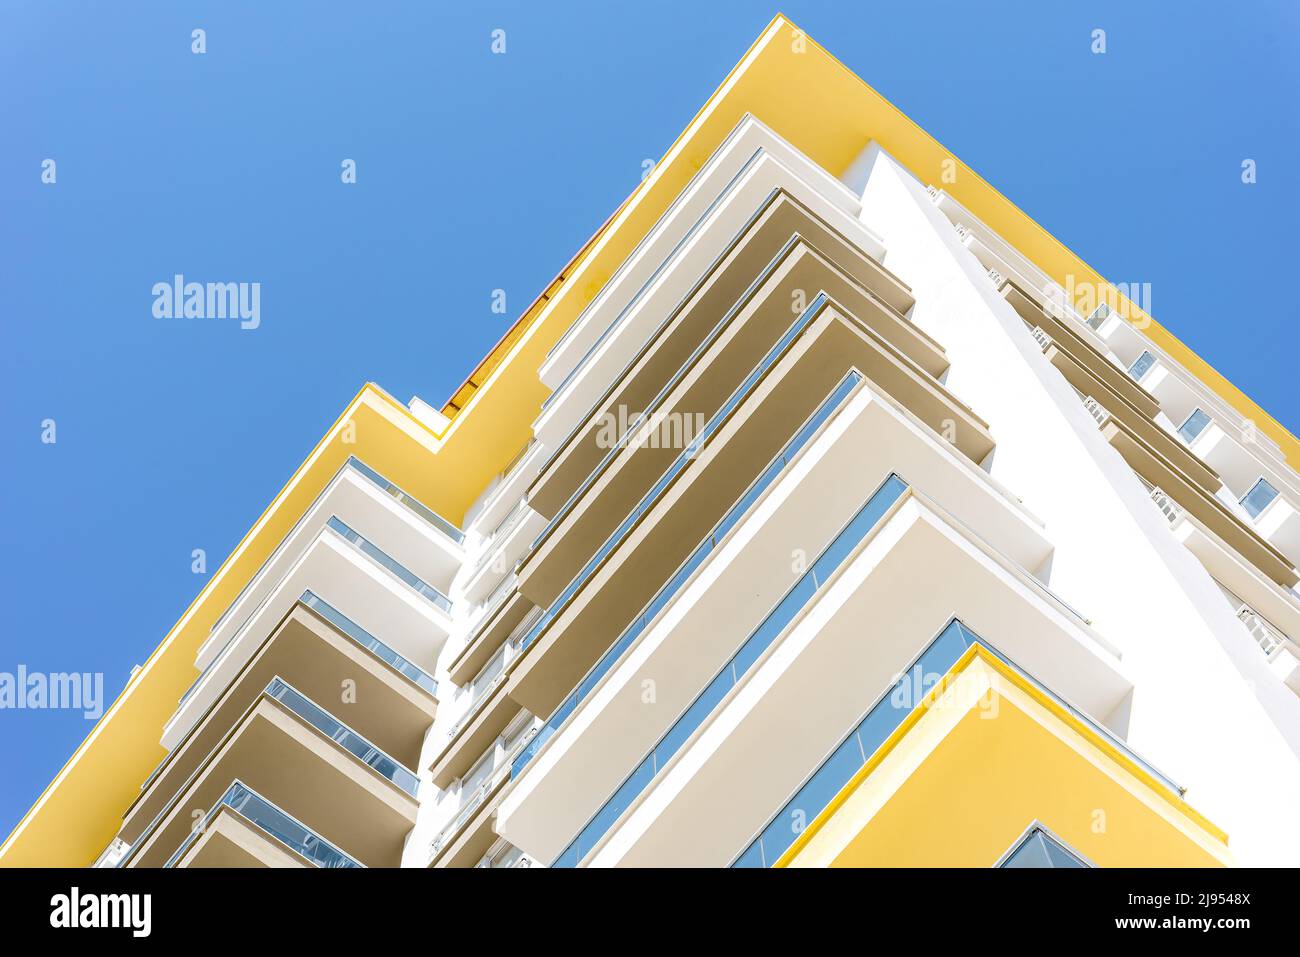 Abstract architecture. View of a residential building from a low angle. Stock Photo